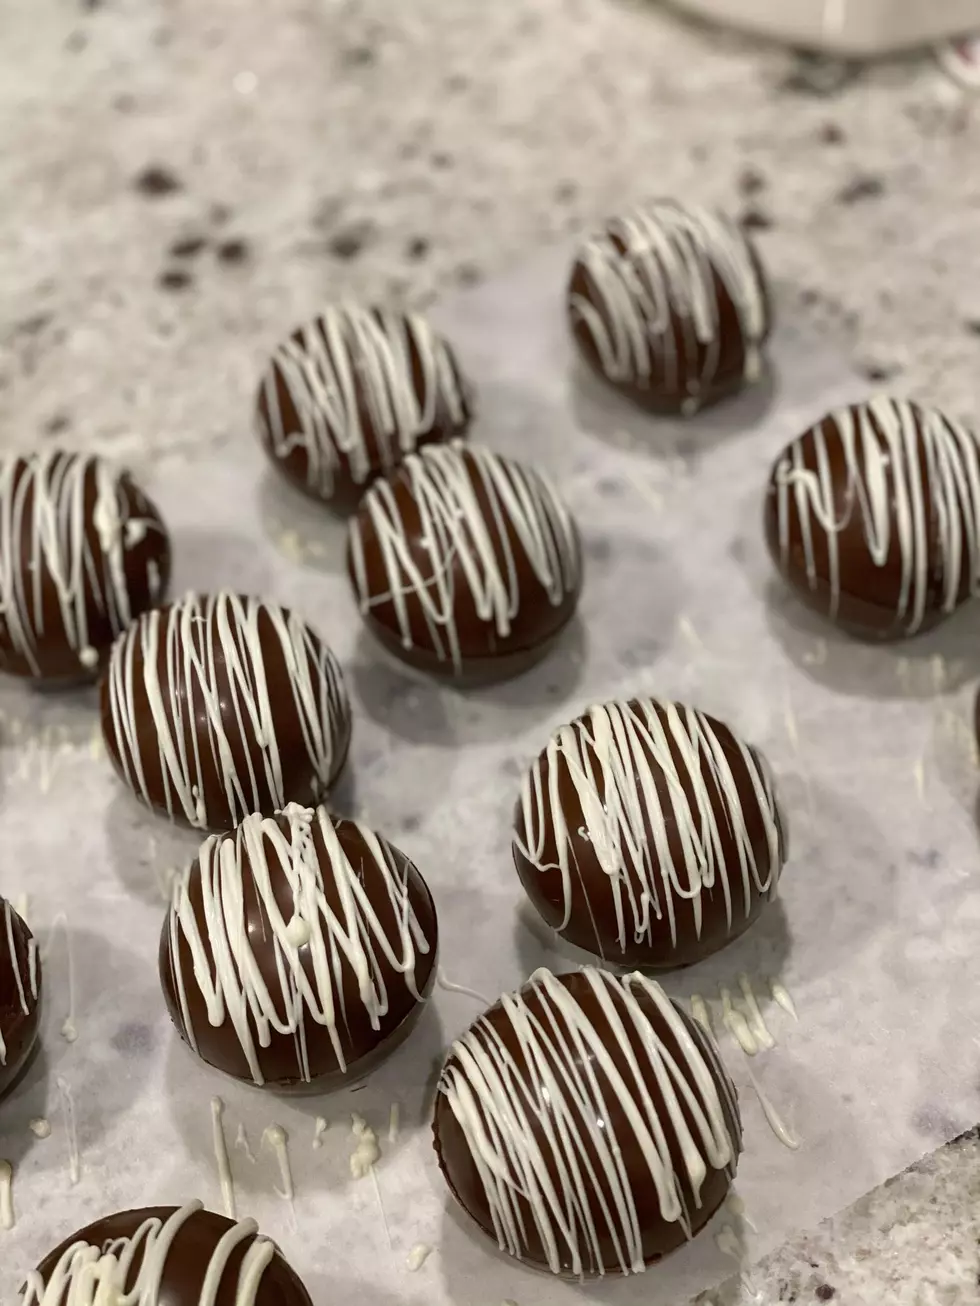 11 Jersey Shore Shops Where You Can Buy Hot Cocoa Bombs